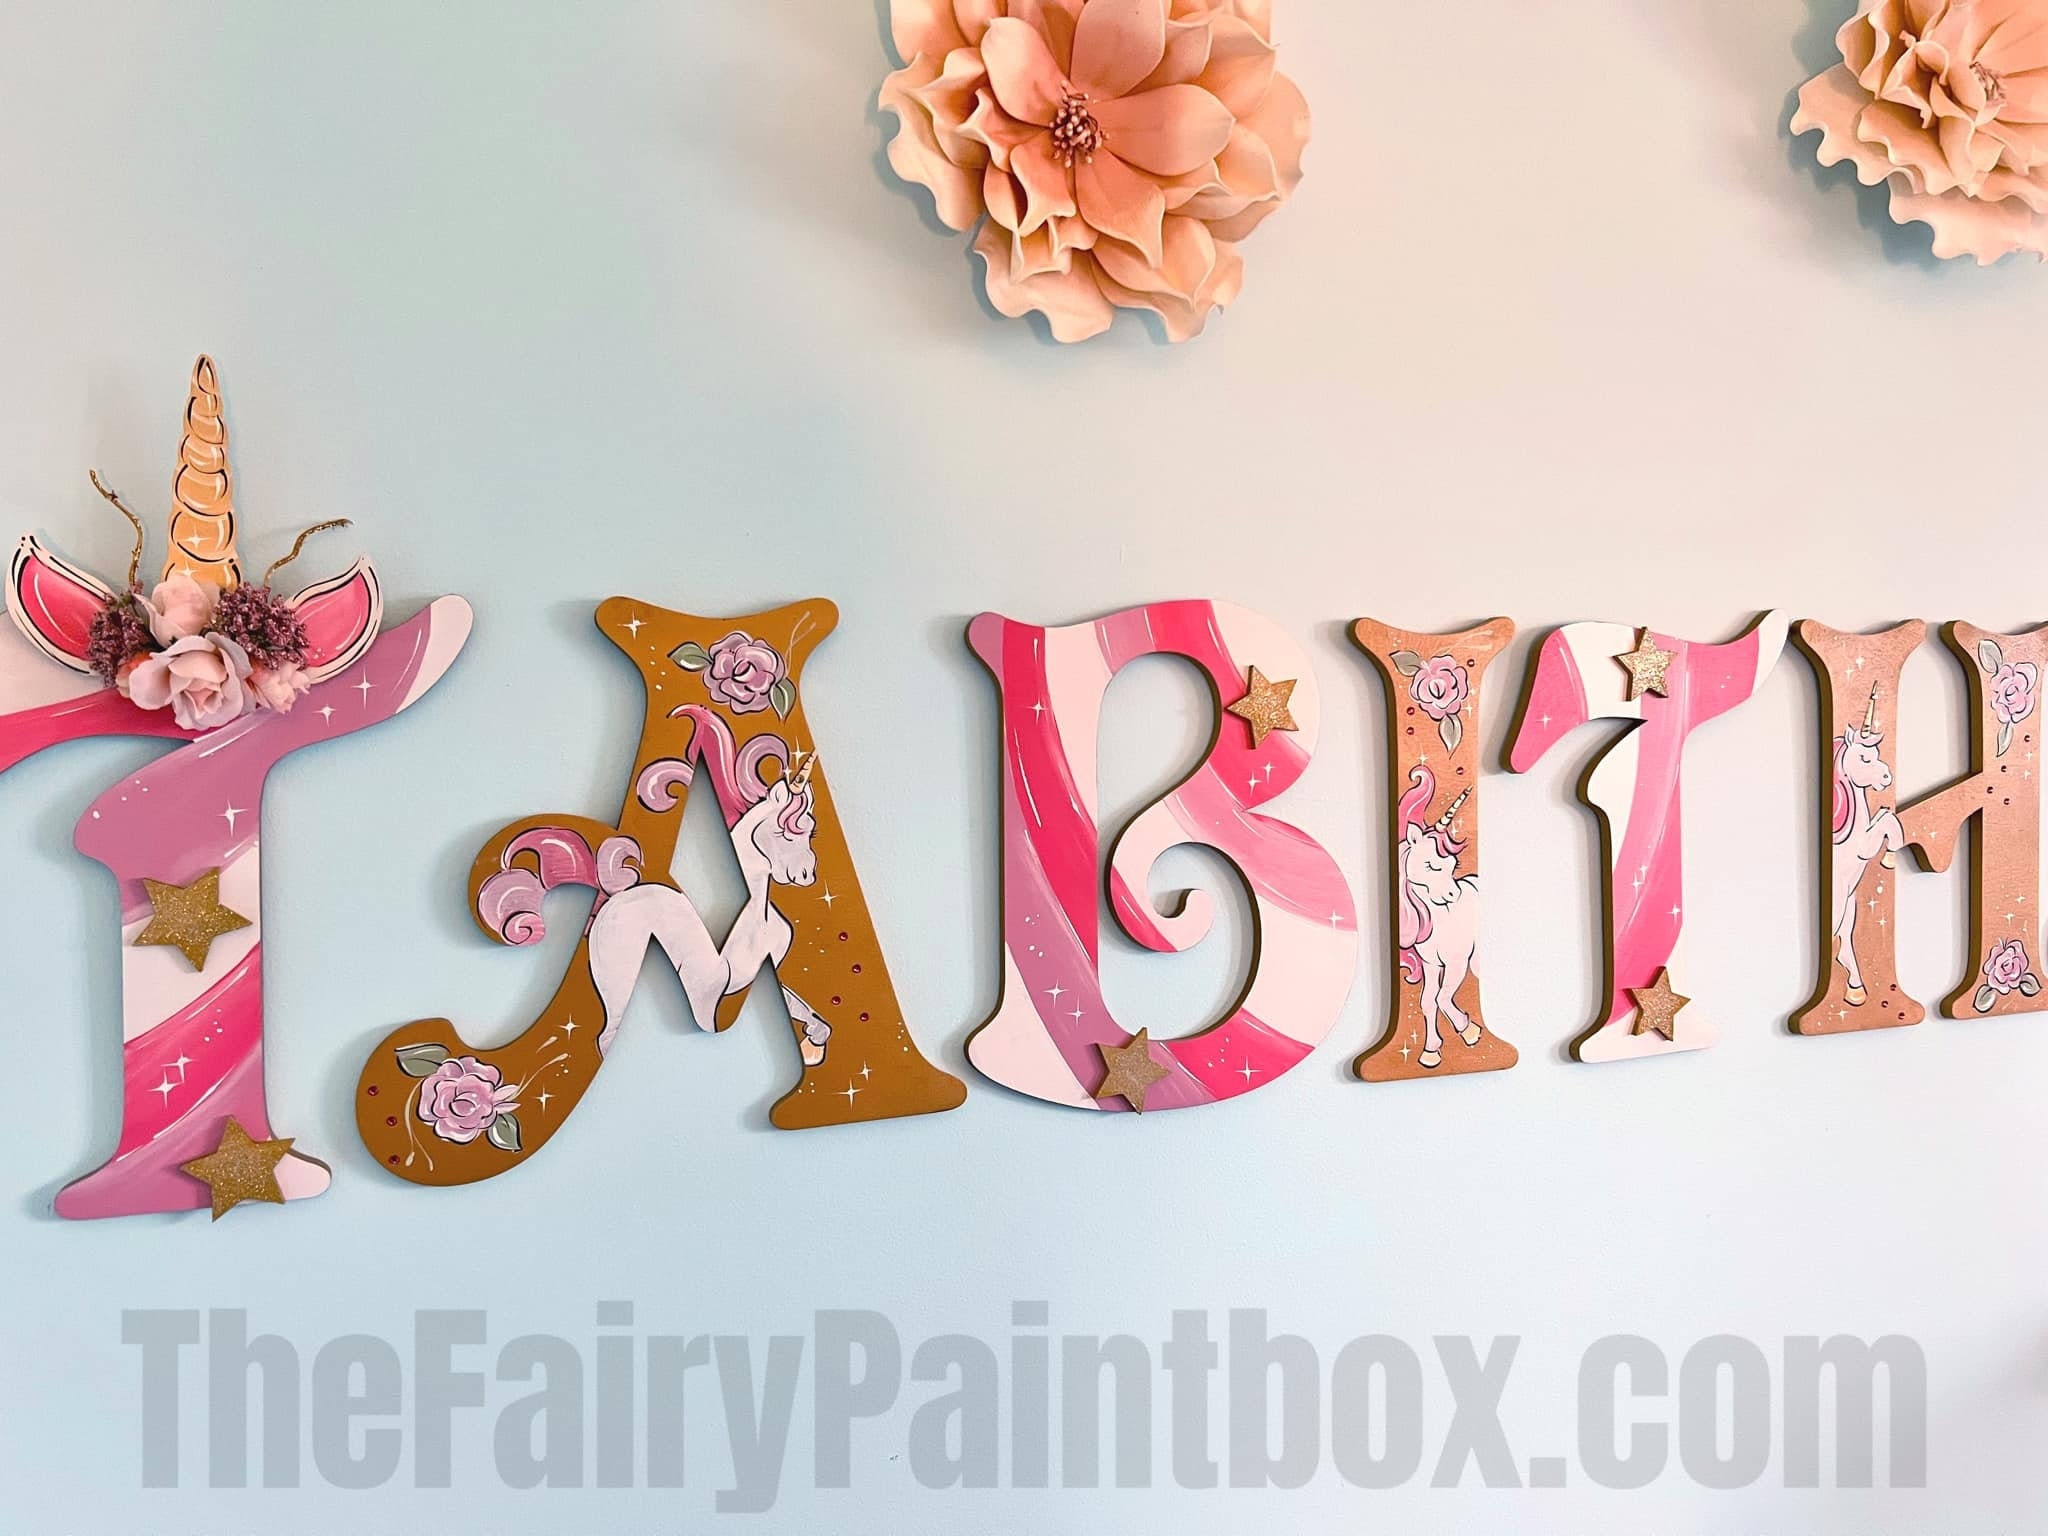  Large 12 Hand Painted Gold Letter Wall Decor Monogram